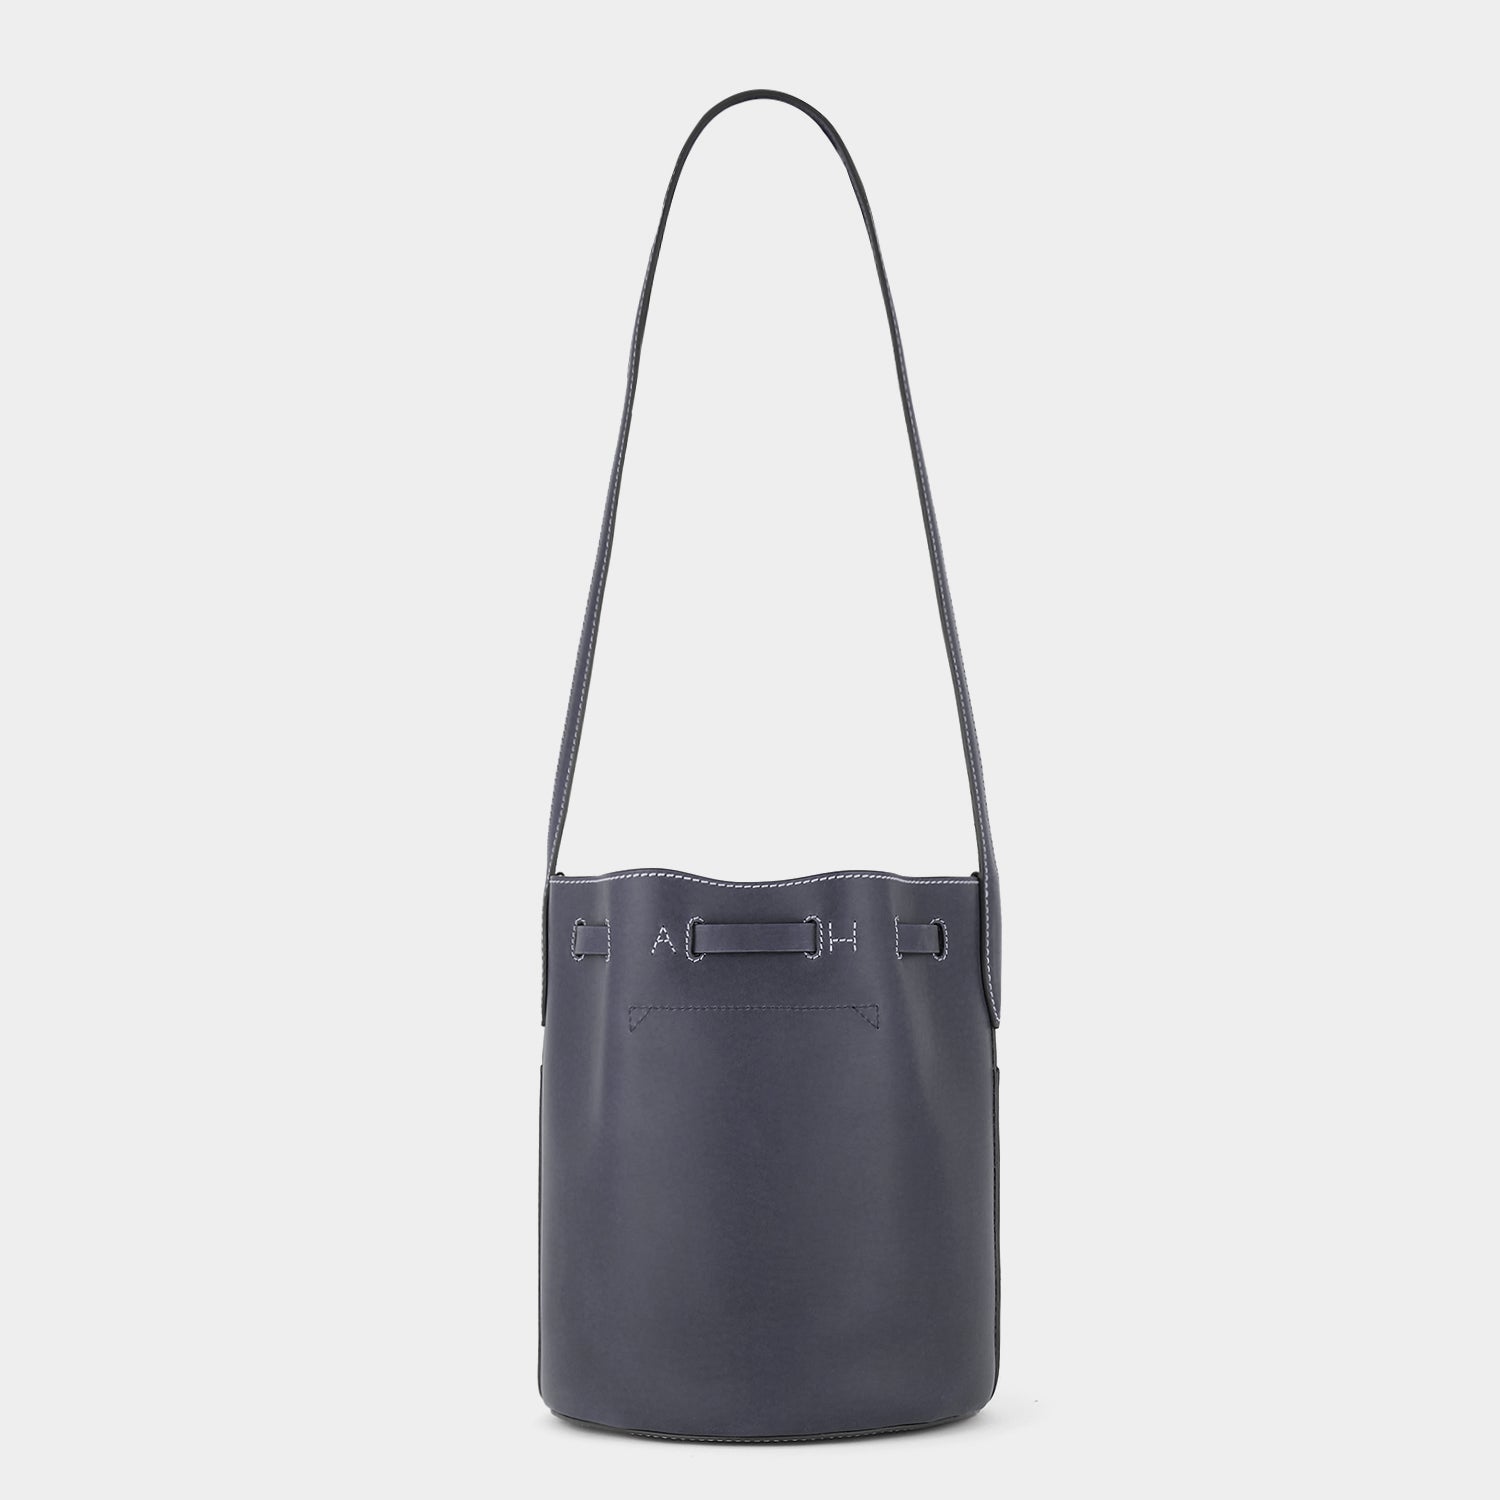 Return to Nature Small Bucket Bag -

                  
                    Compostable Leather in Marine -
                  

                  Anya Hindmarch EU
